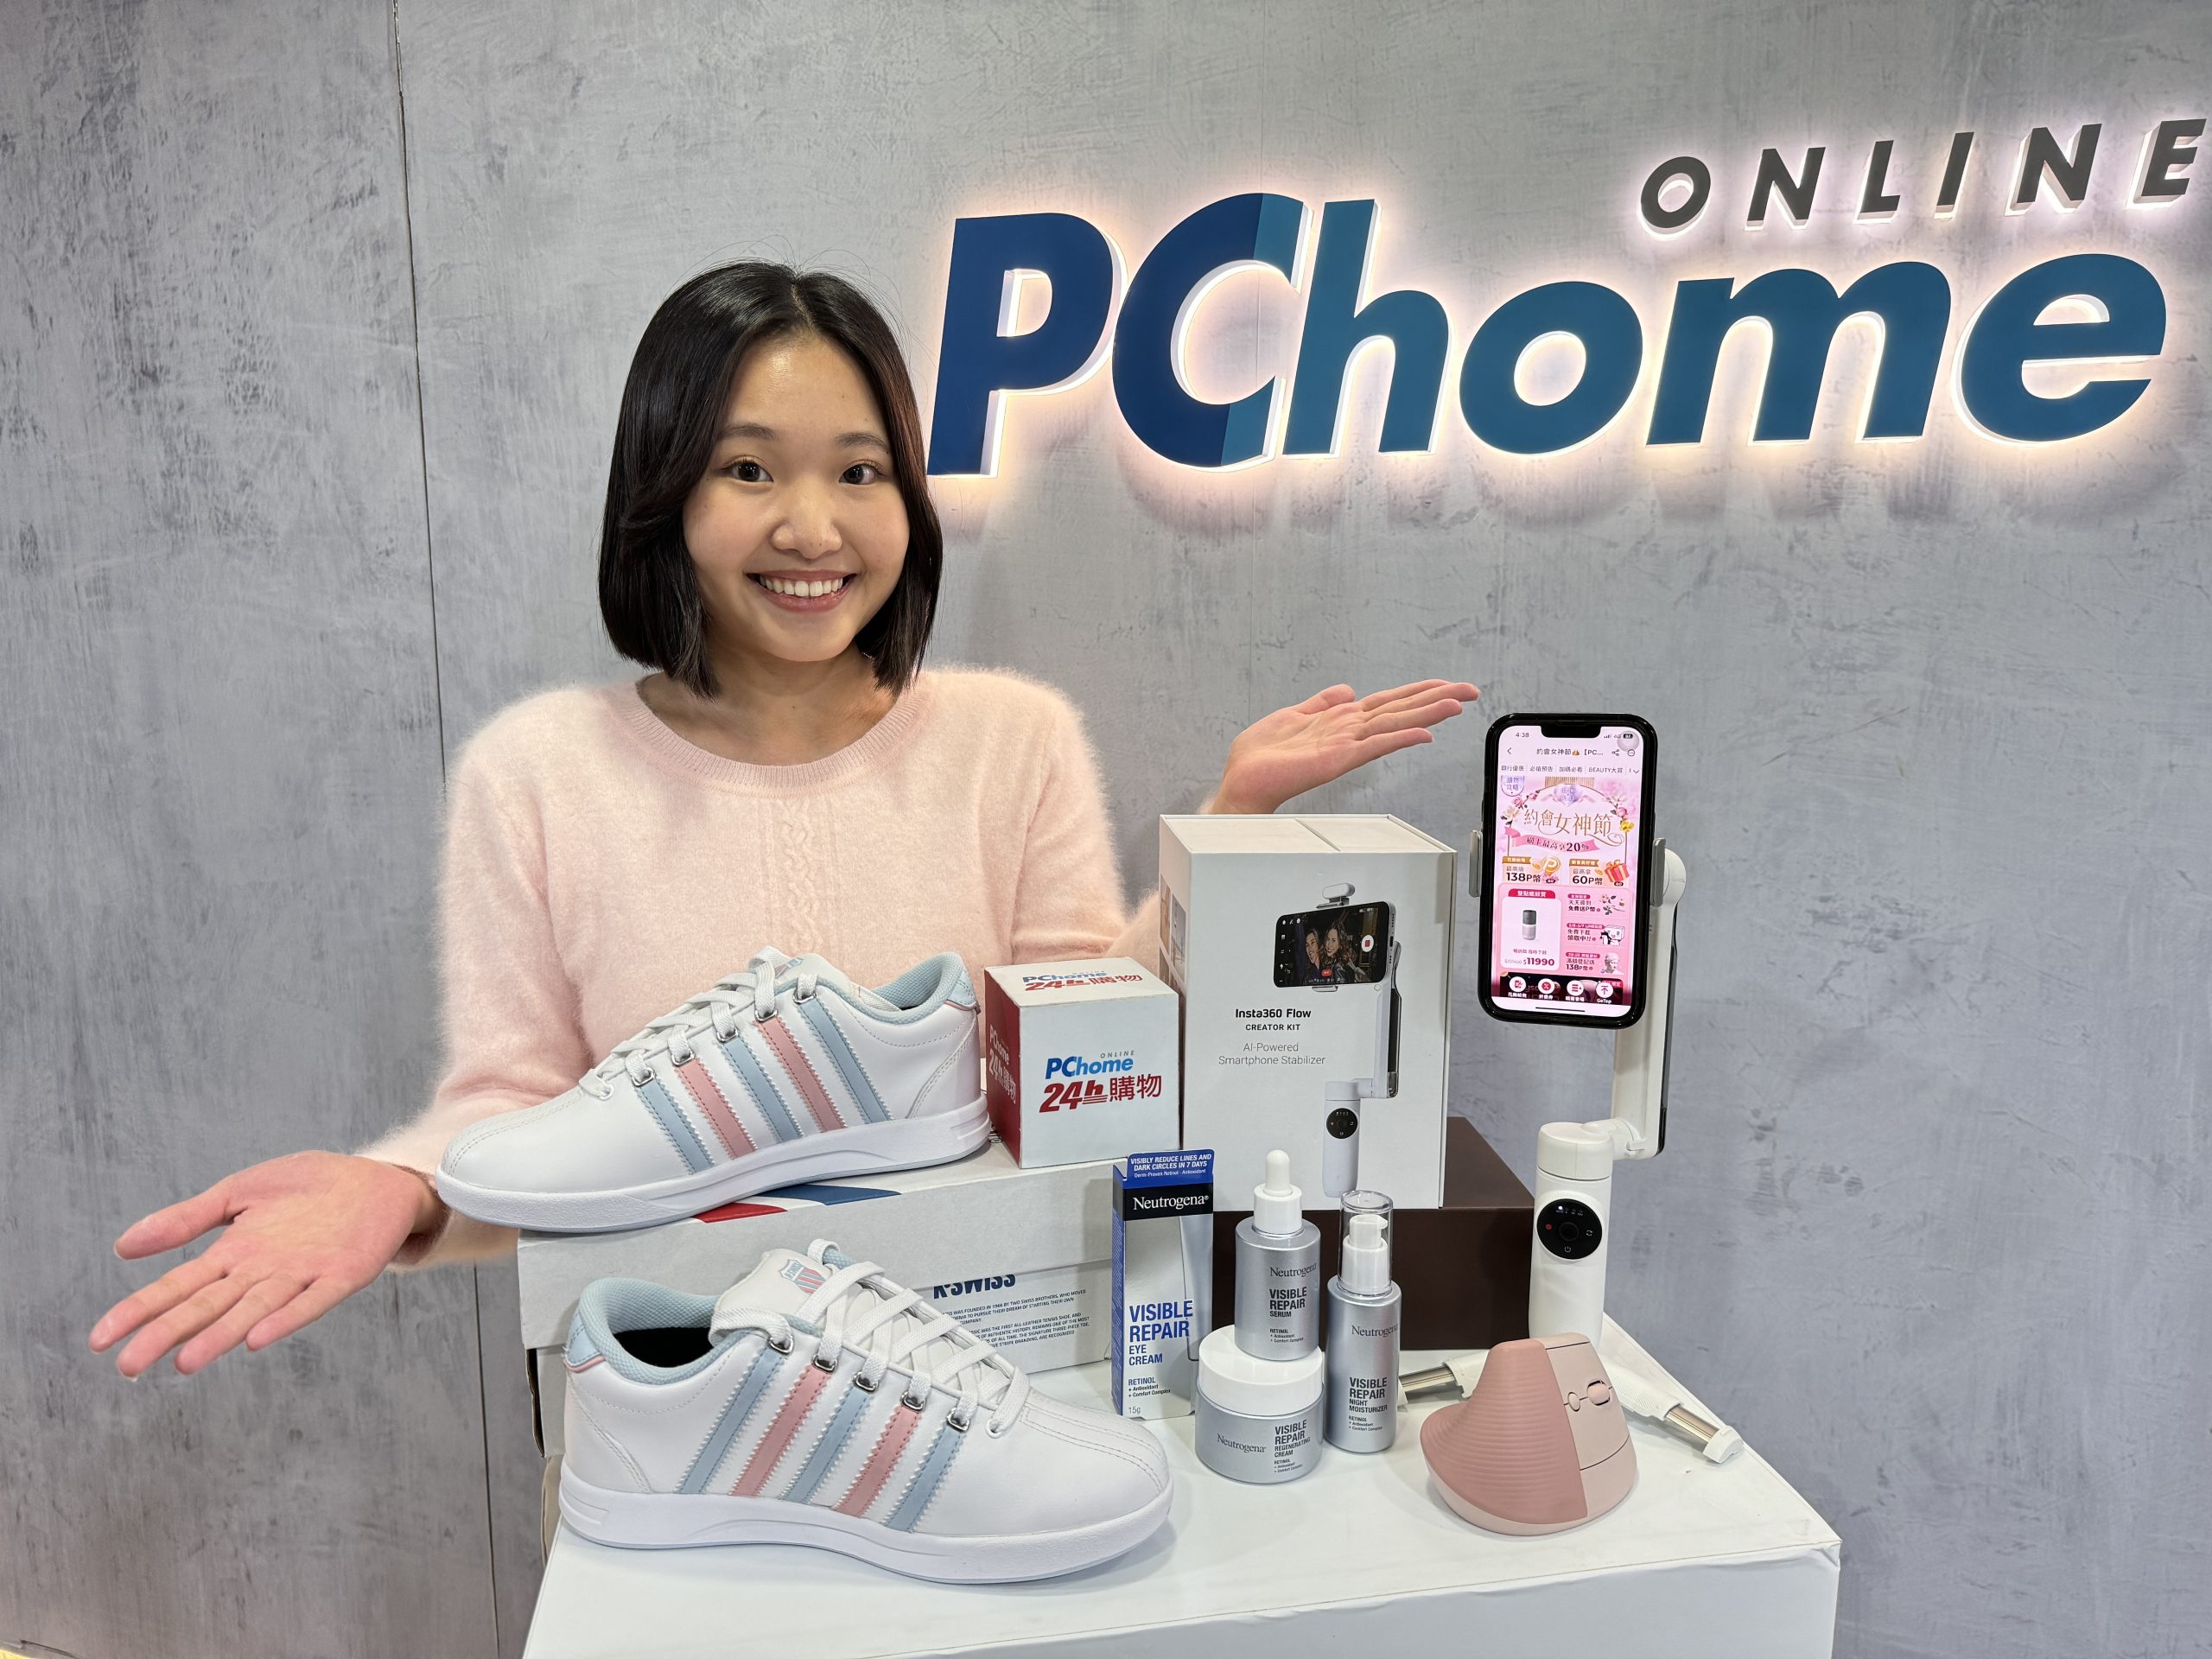 The Power of Women! PChome 24h Shopping Sees Sales of Beauty Appliances Double; Female Membership Increases by over 10% YoY